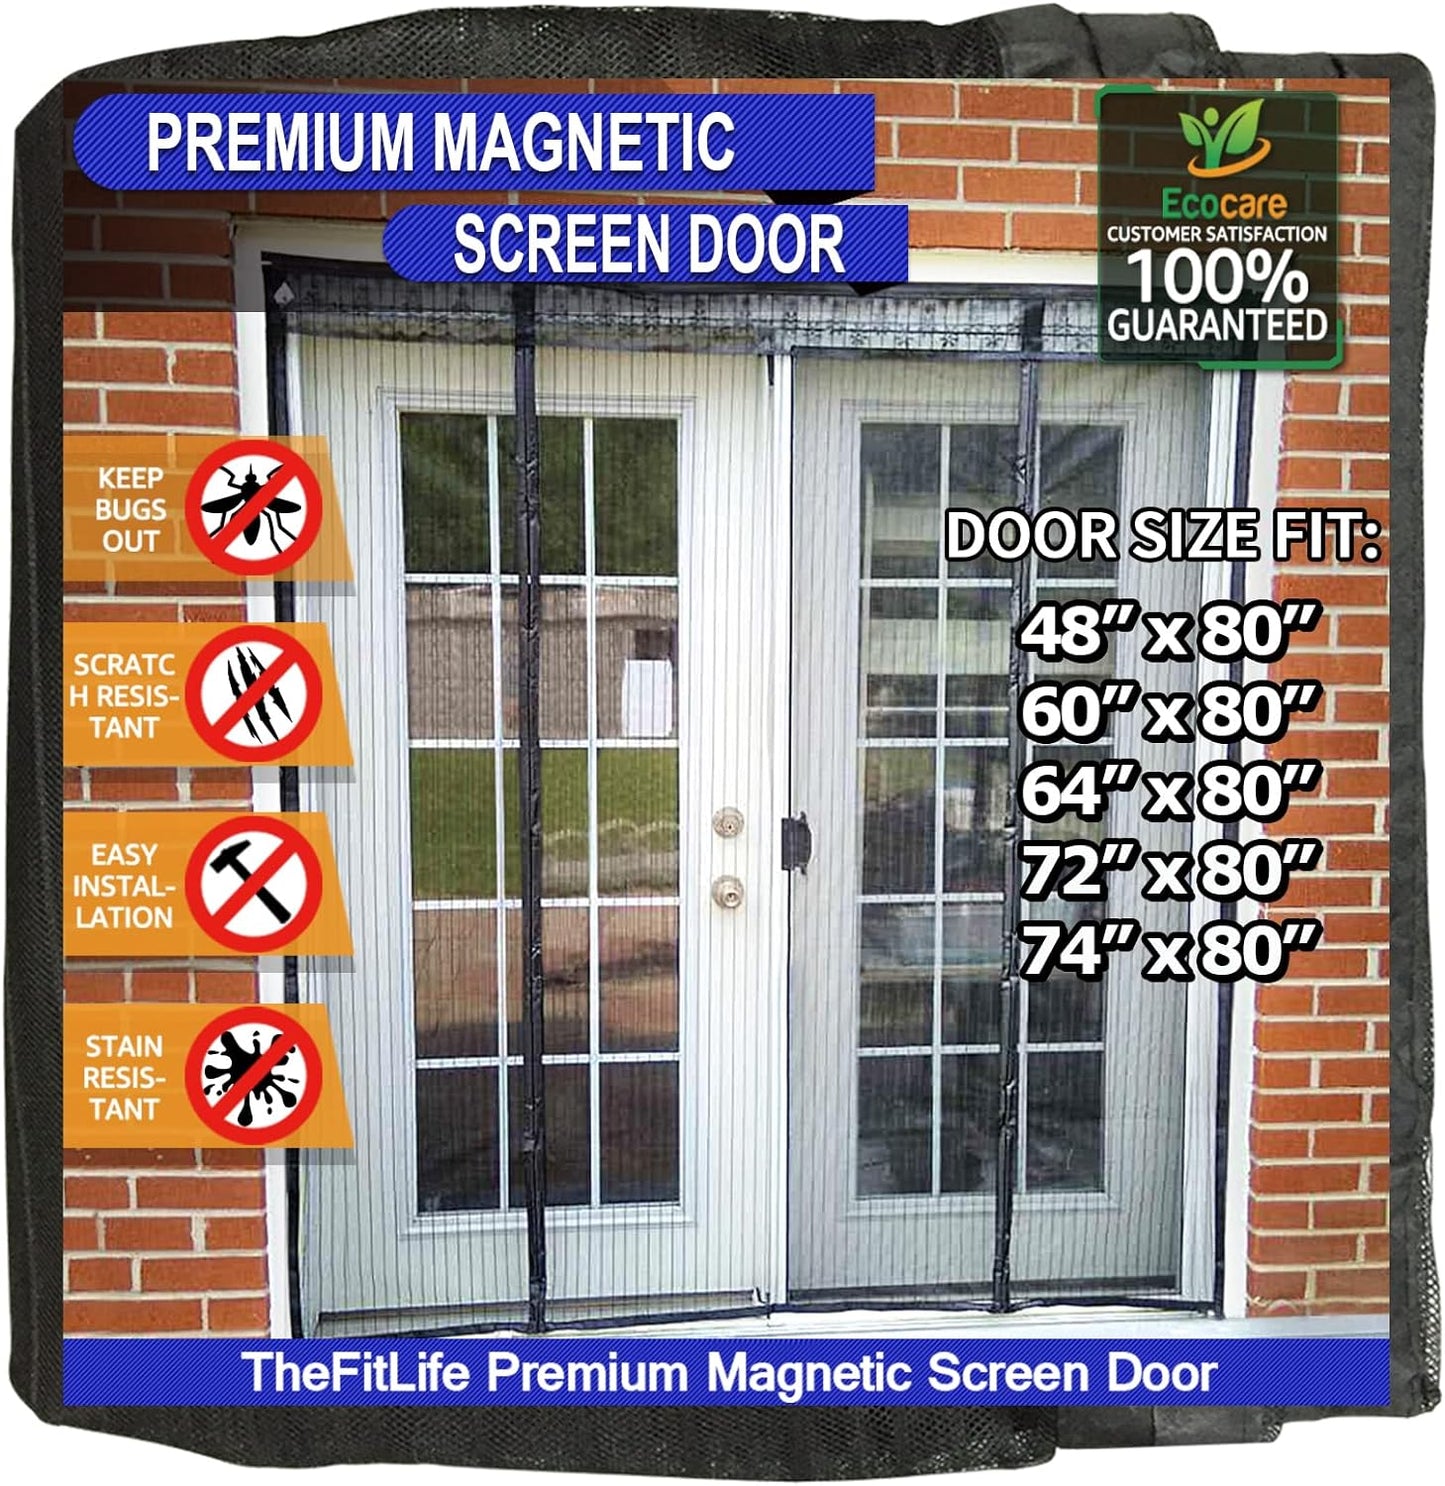 Thefitlife Double Door Magnetic Screen - Mesh Curtain with Full Frame Hook & Loop Powerful Magnets, Snap Shut Automatically for Patio, Sliding or Large Door, Black Fits Doors up to 72''X80'' Max  TheFitLife Black Fits Doors Up To 64''X80'' Max  